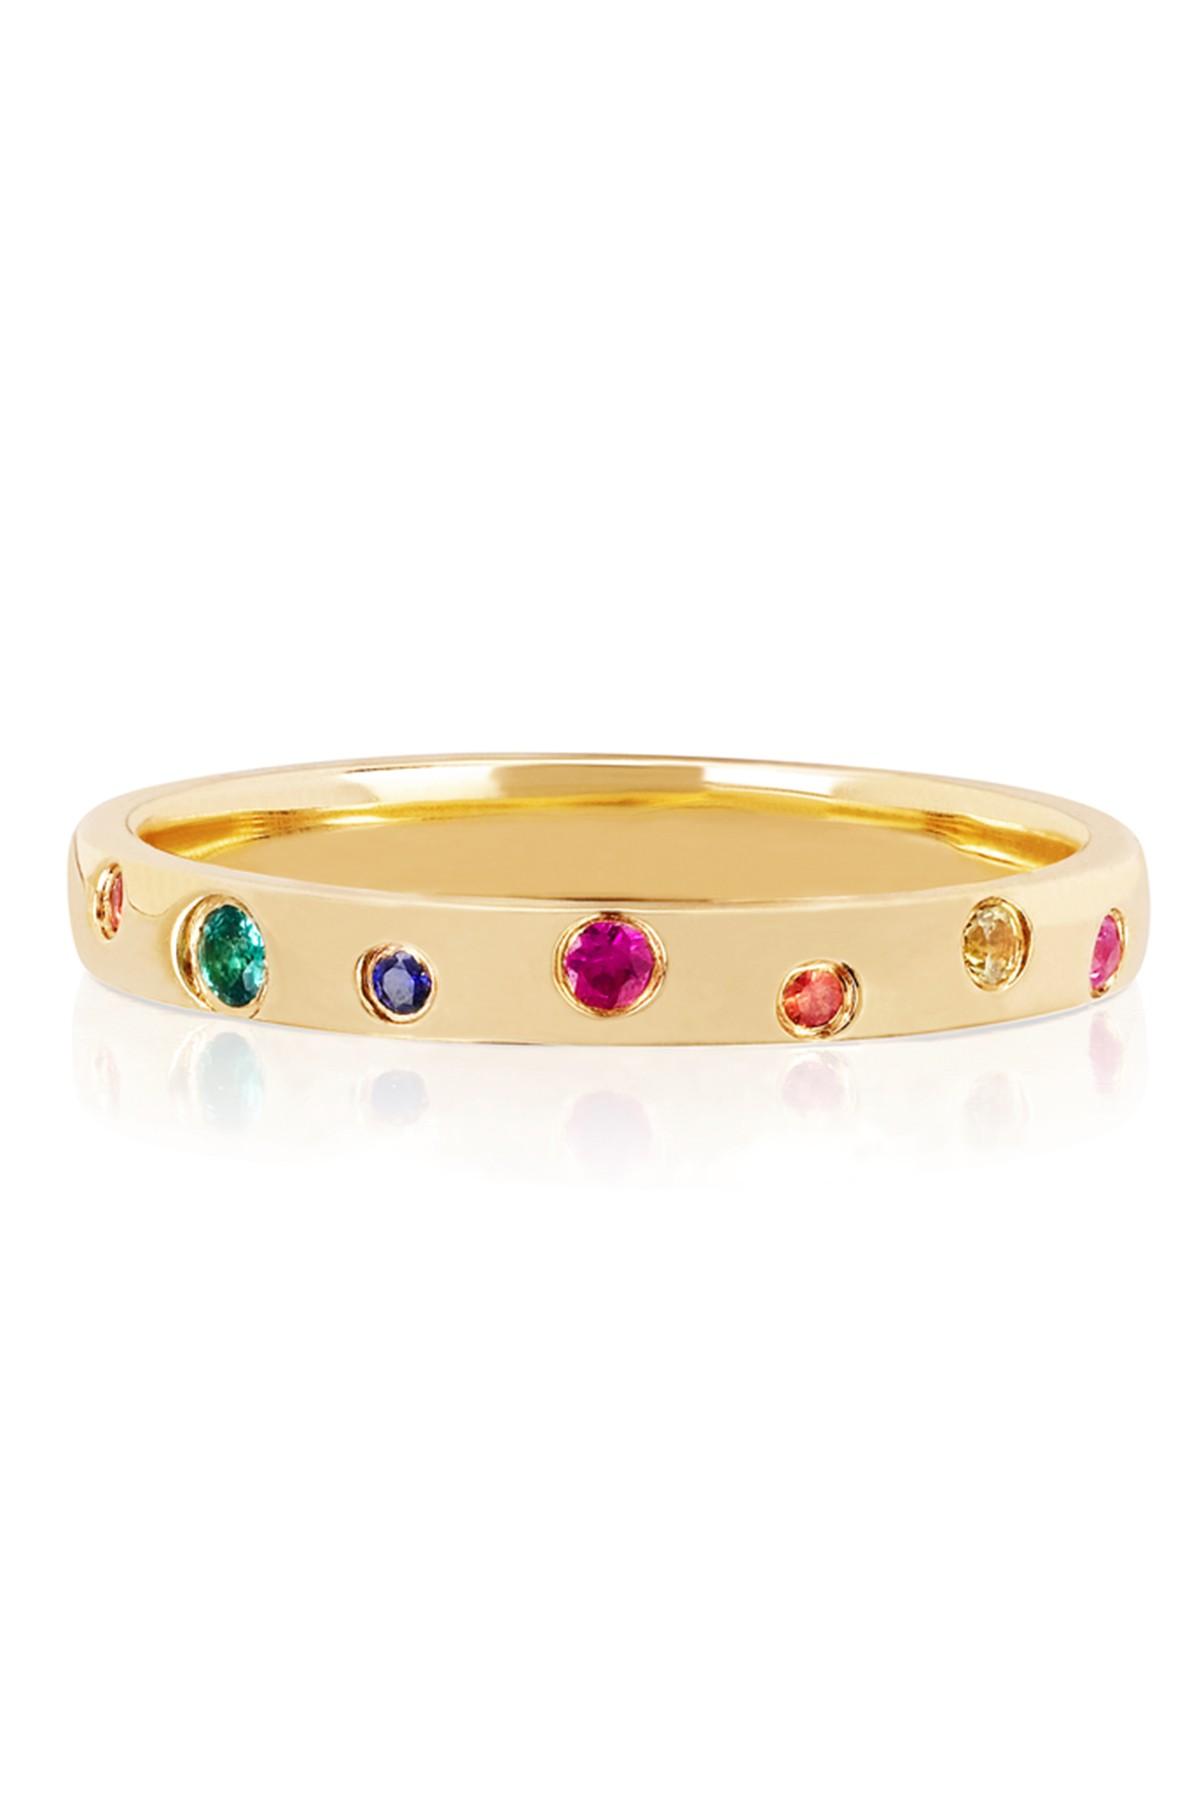 EF Collection 14k Yellow Gold Rainbow Gemstone Speckled Ring - Size 7 ...